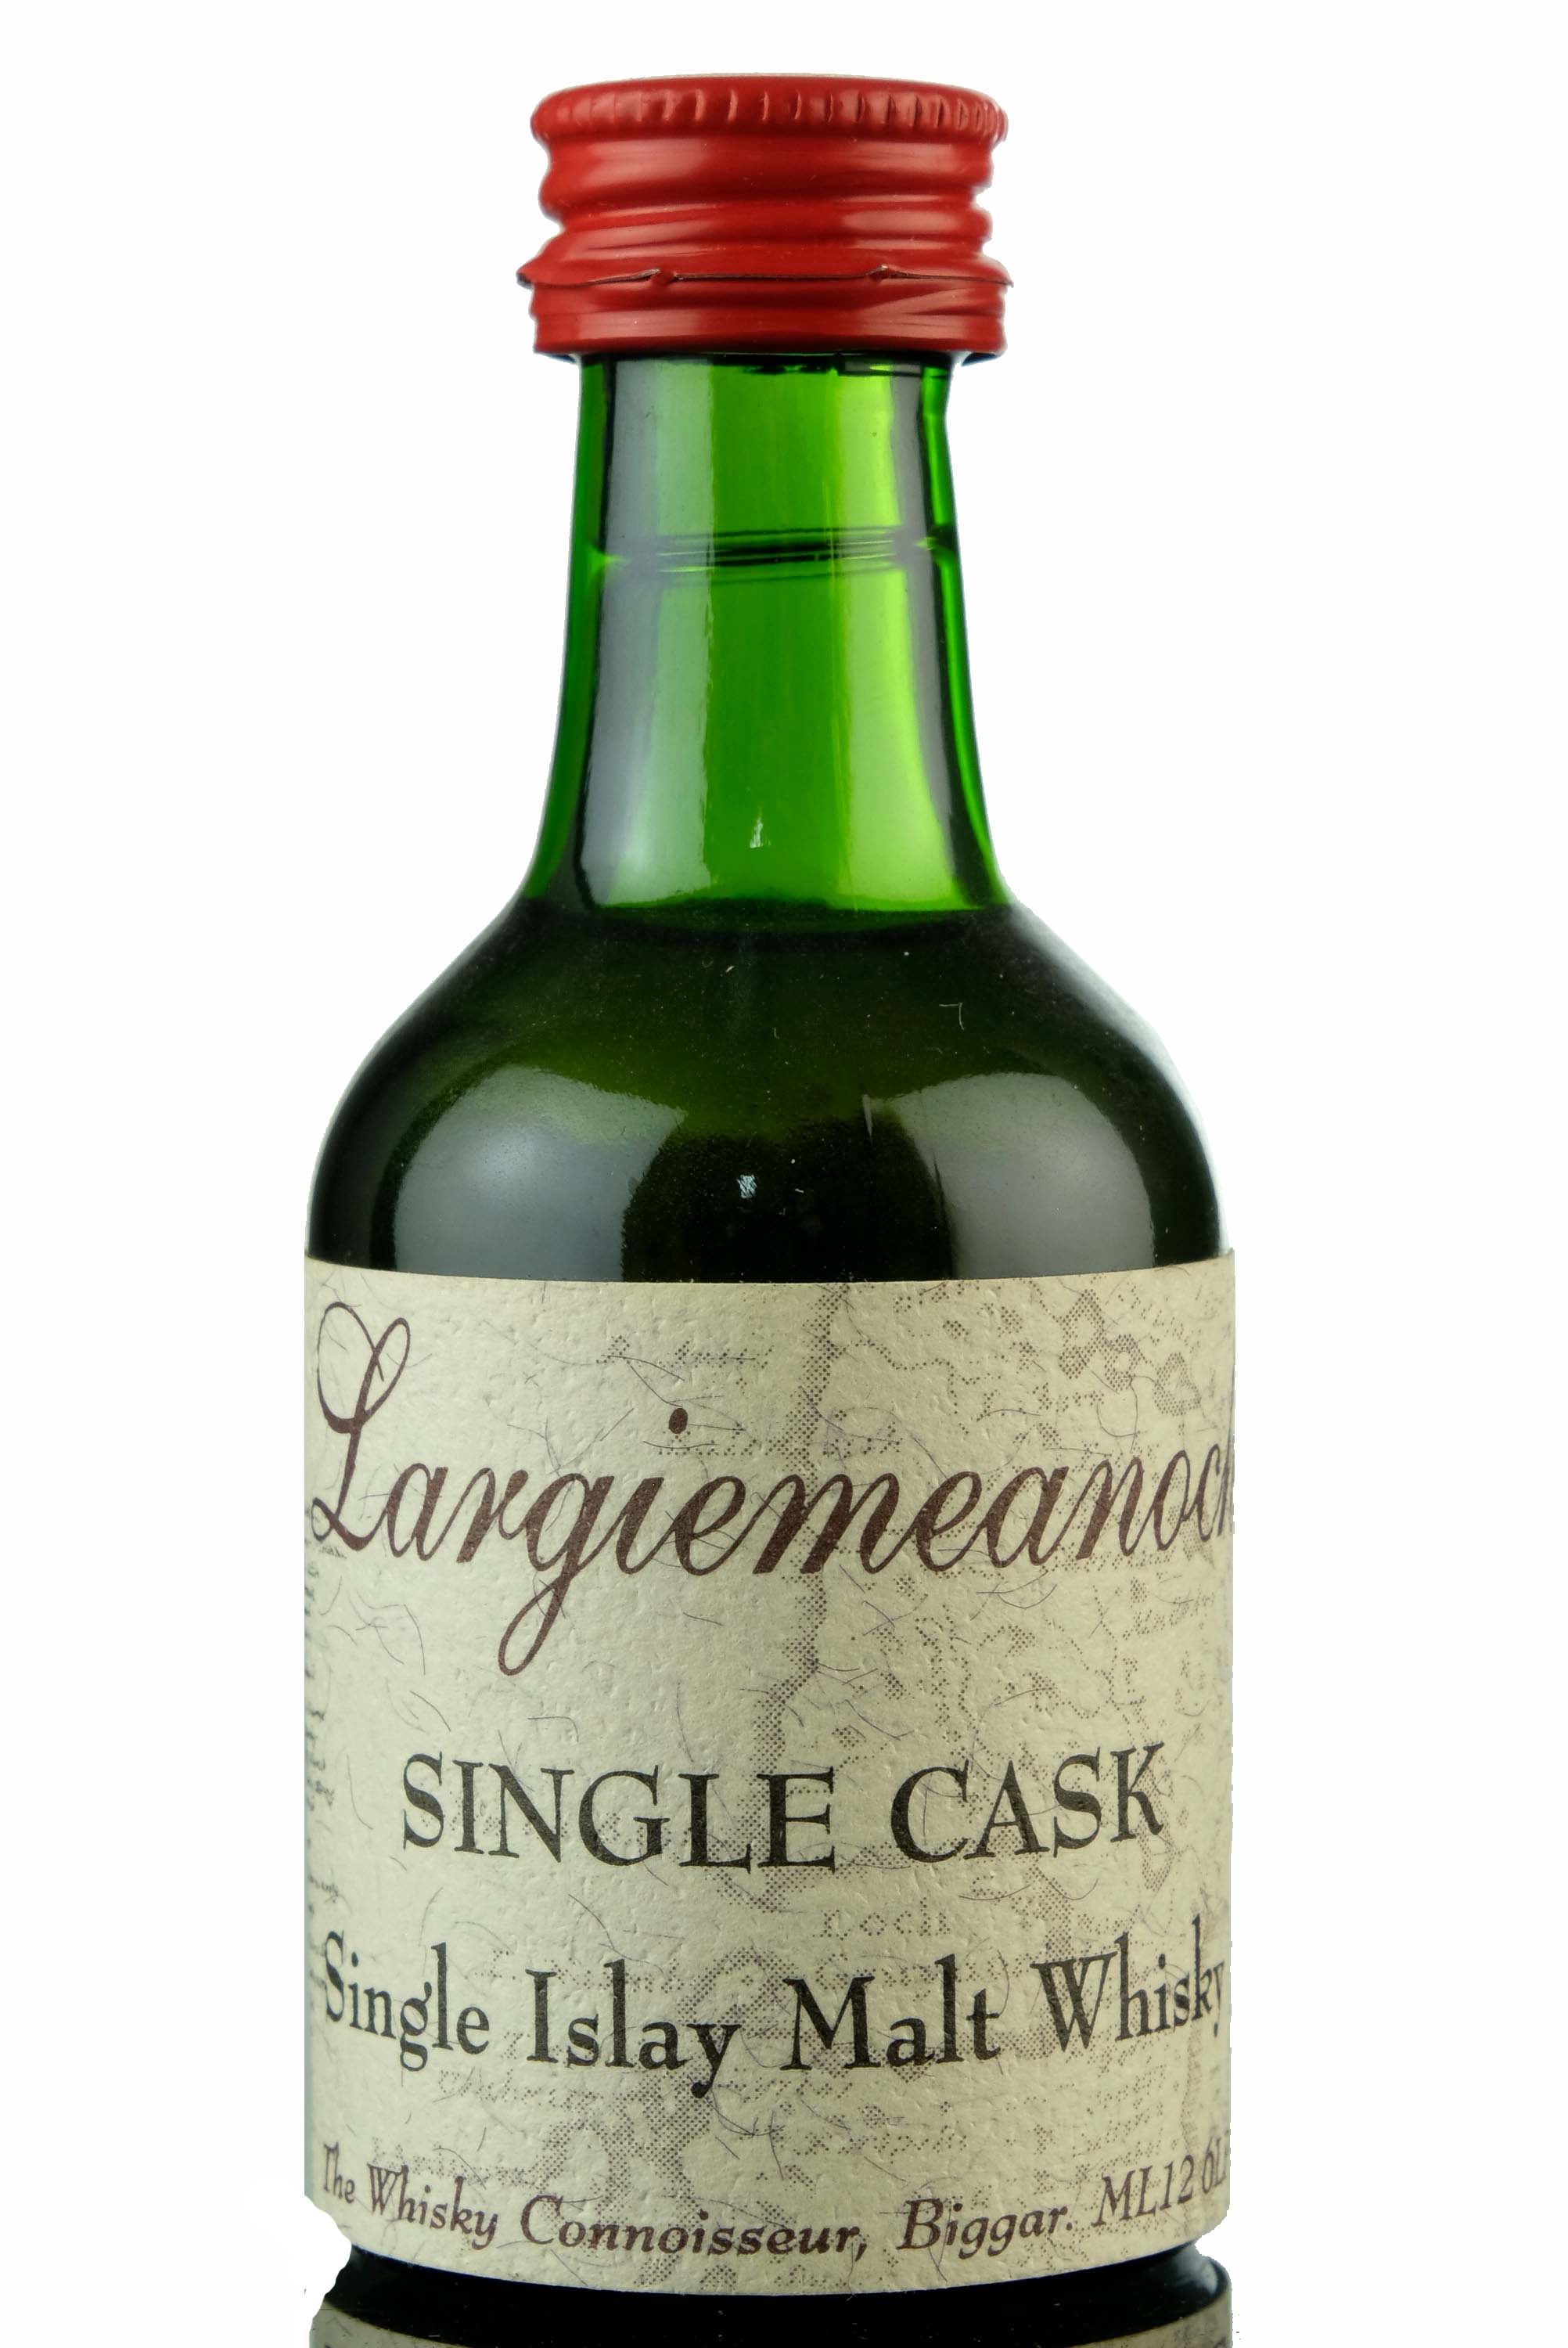 Bowmore (Largiemeanoch) 1973 - 22 Year Old - The Whisky Connoisseur Miniature